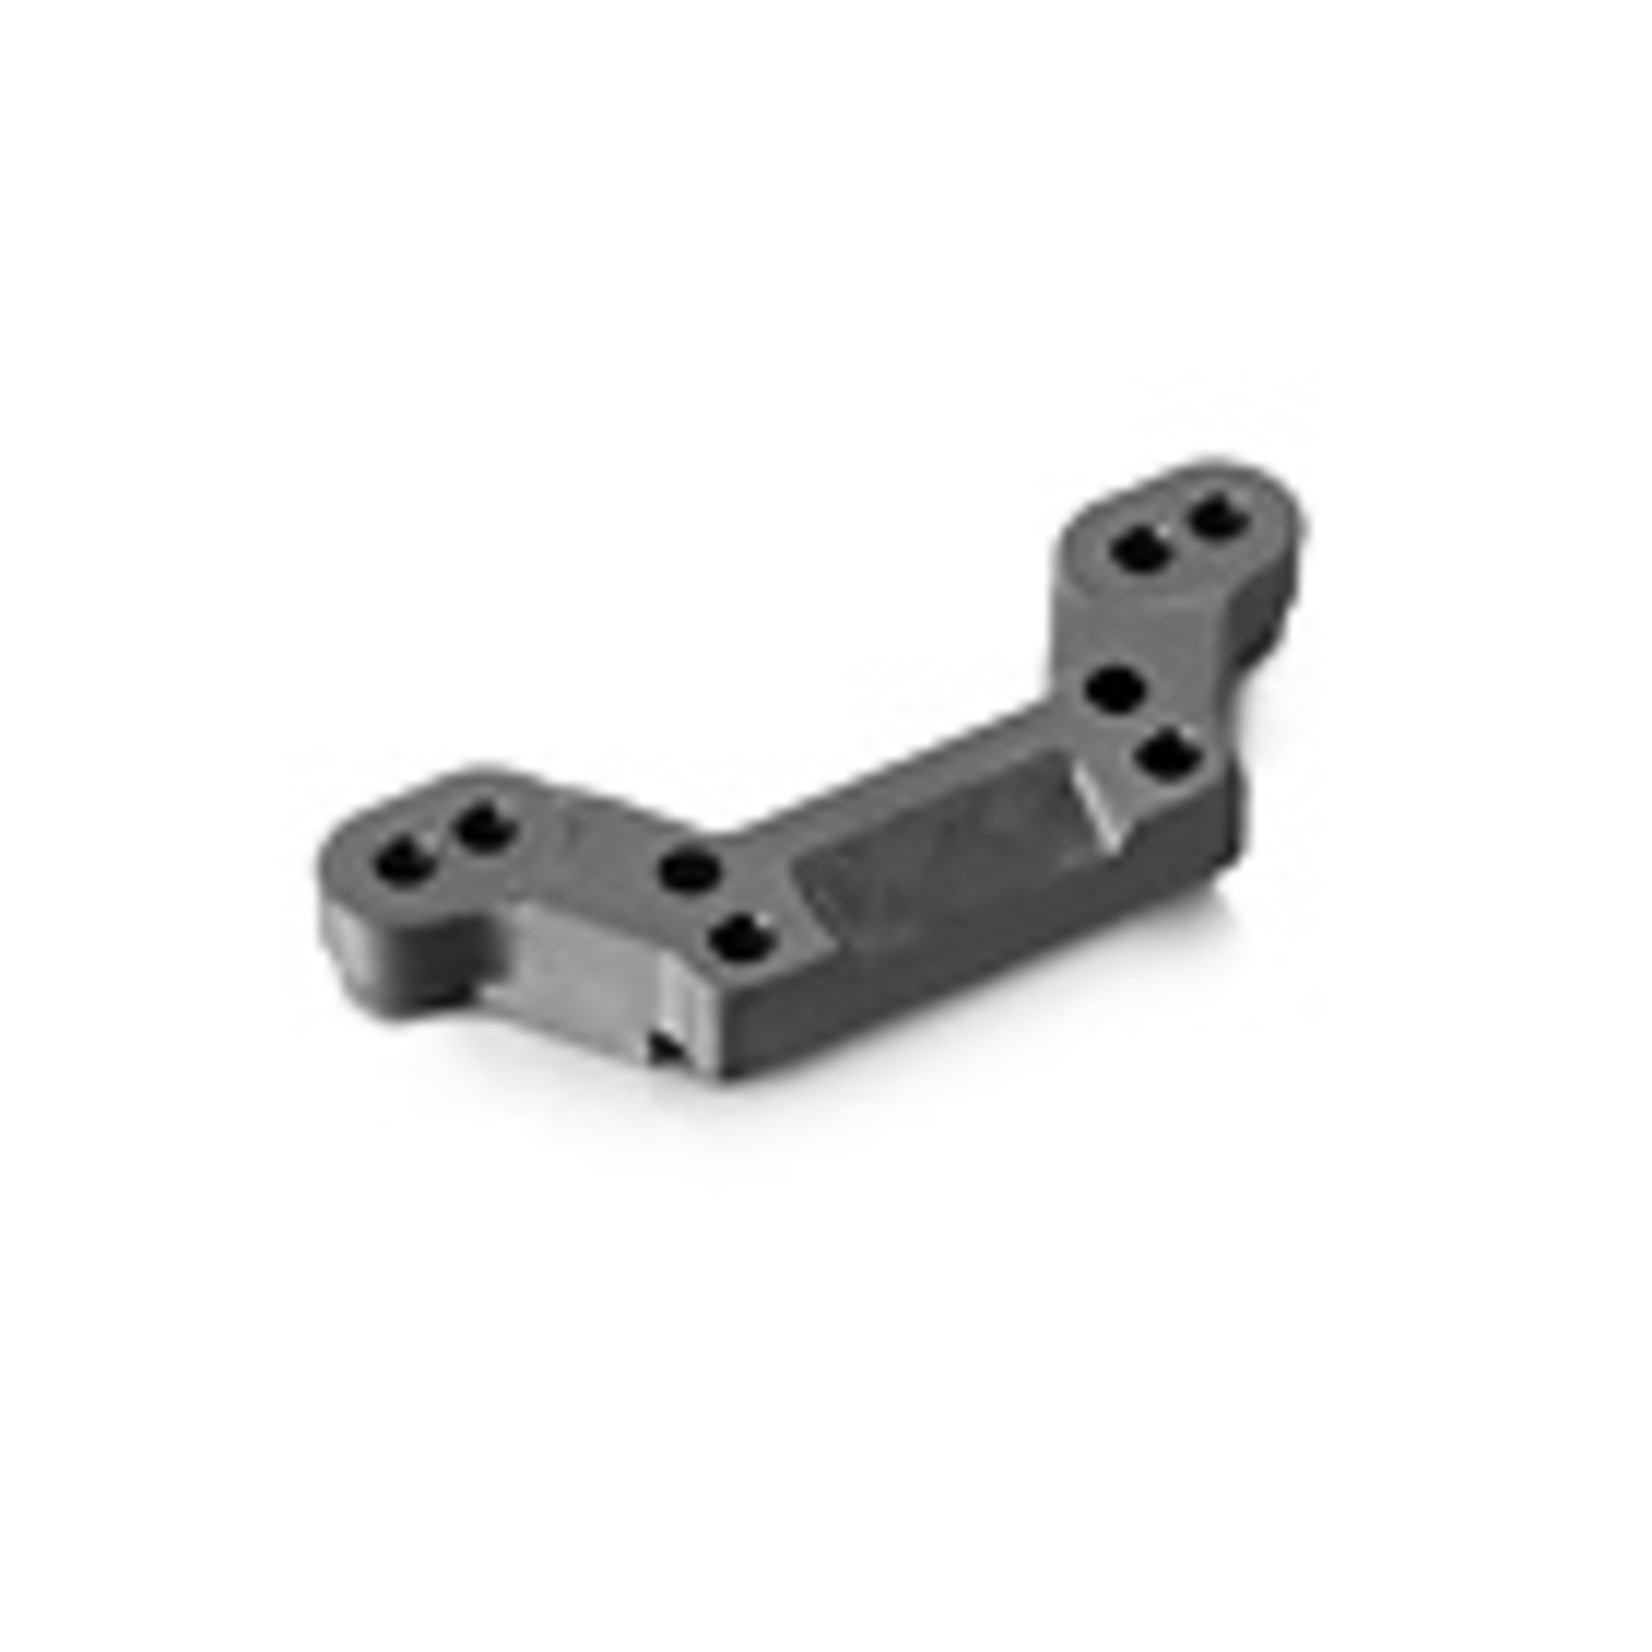 XRAY XRAY Racing 323042-M COMPOSITE REAR ROLL-CENTER HOLDER - DIRT EDITION (Med)